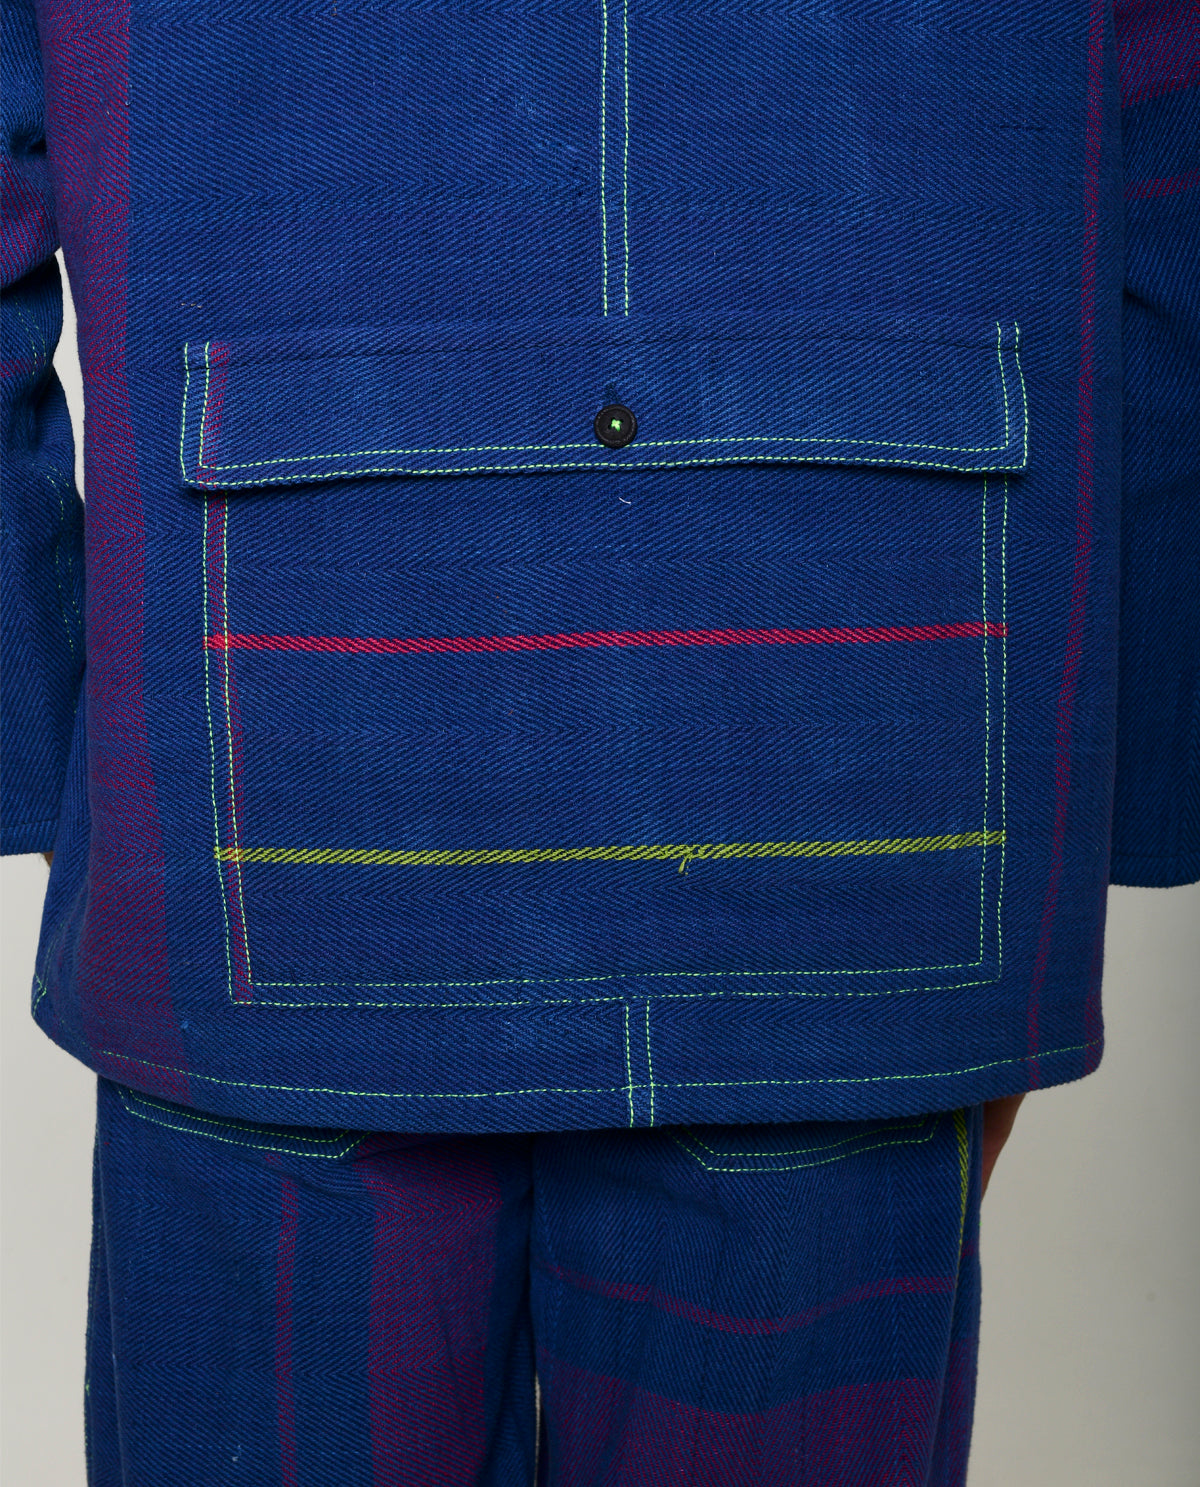 Handwoven Blue Multi Colored Cotton Shirt Jacket at Kamakhyaa by Rias Jaipur. This item is 100% Cotton, Blue, Casual wear, Multicolor, Natural, Overlays, RE 2.O, Relaxed, Stripes, Unisex, Womenswear